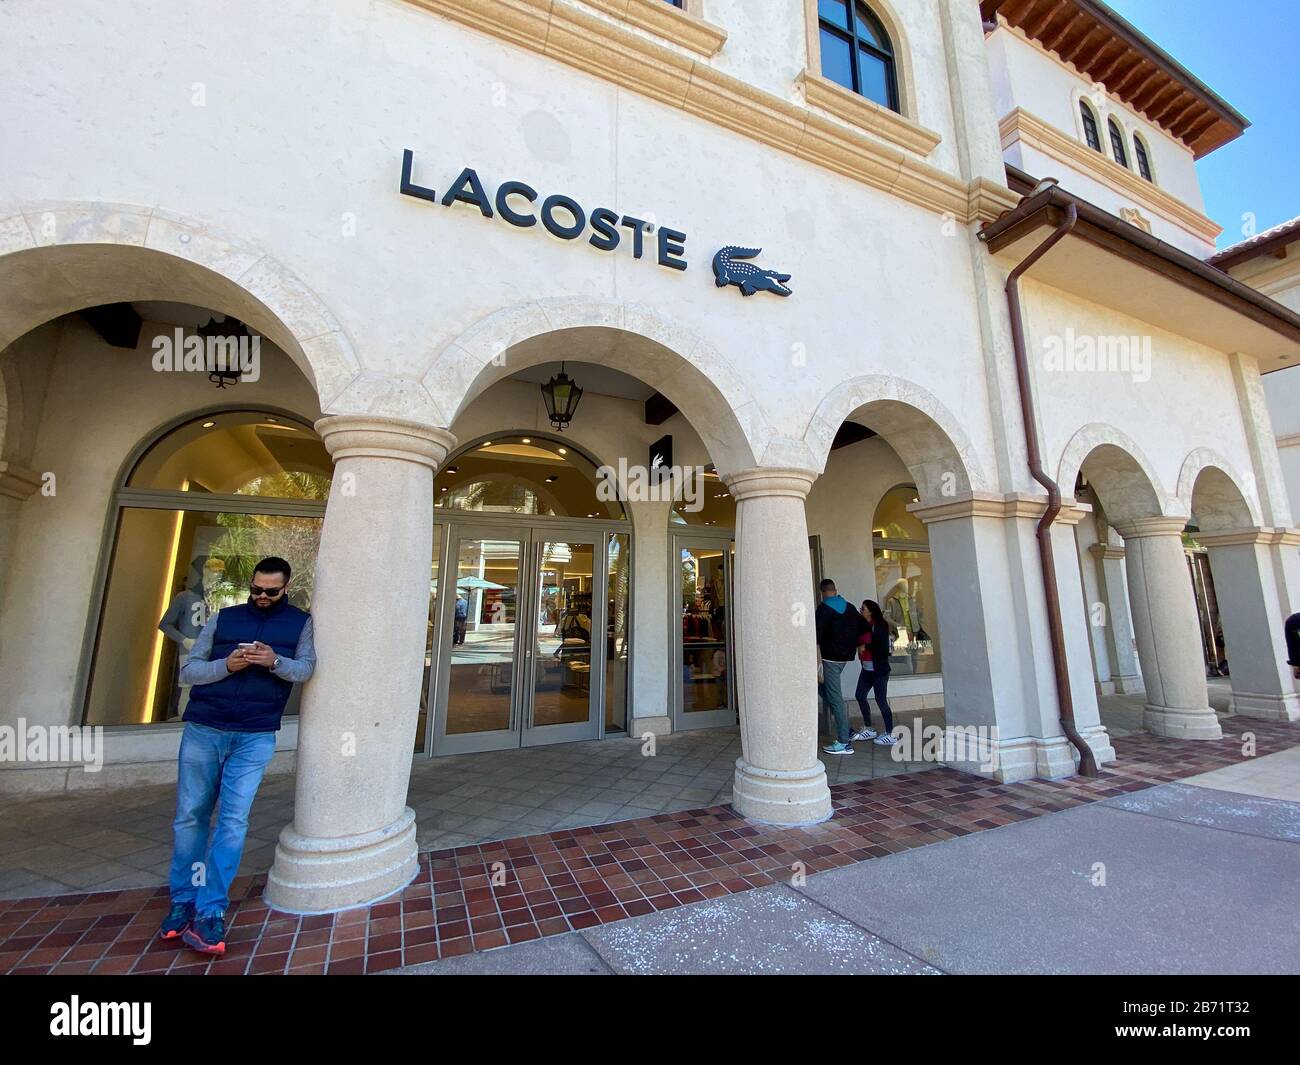 Orlando, FL/USA-2/29/20: A Lacoste clothing retail store at an outdoor ...